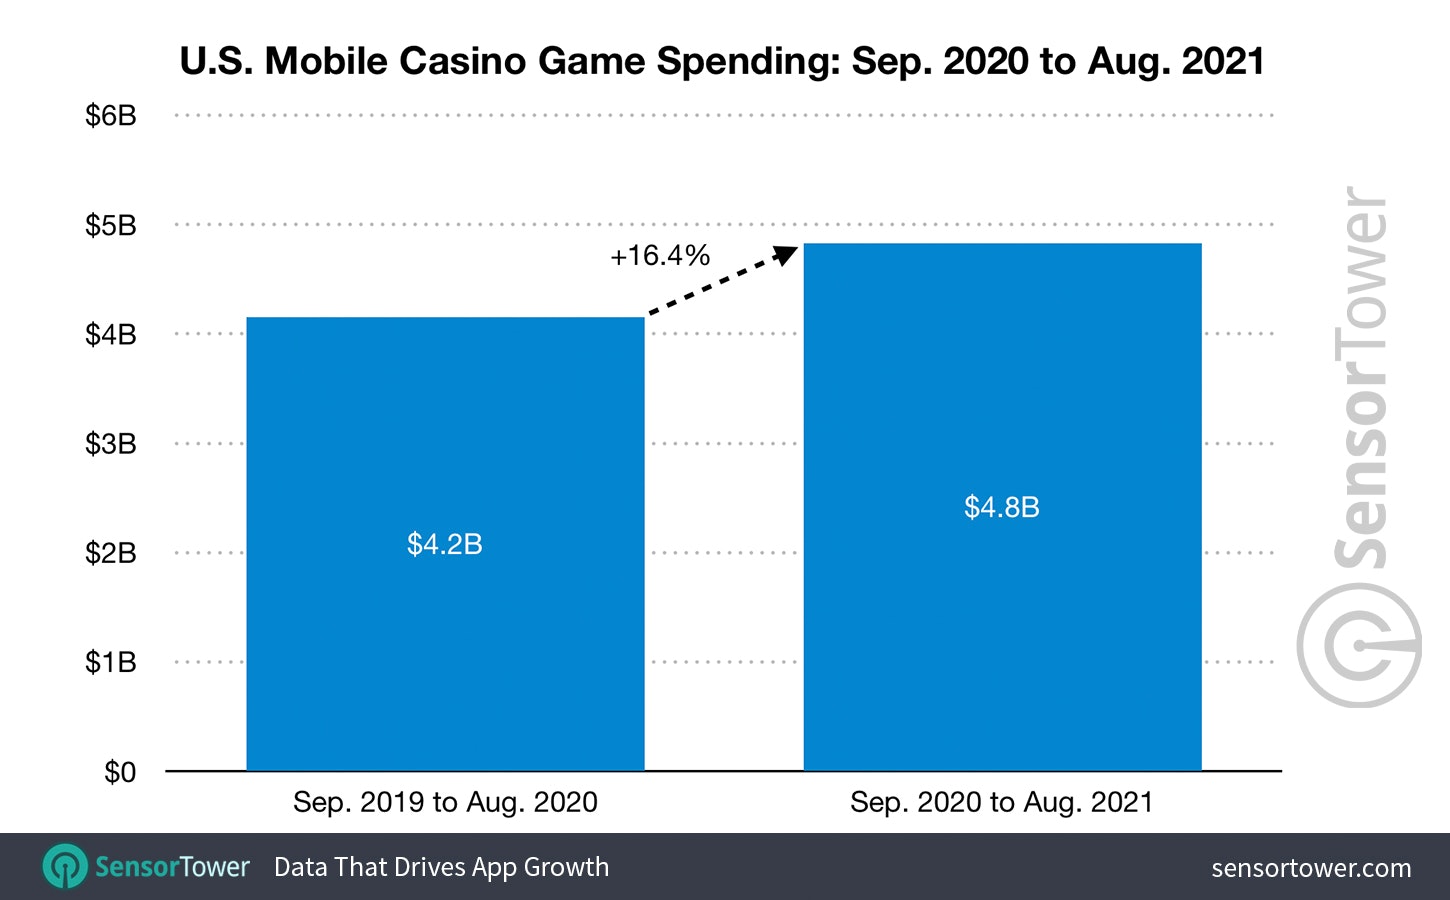 Mobile casino games spending growth